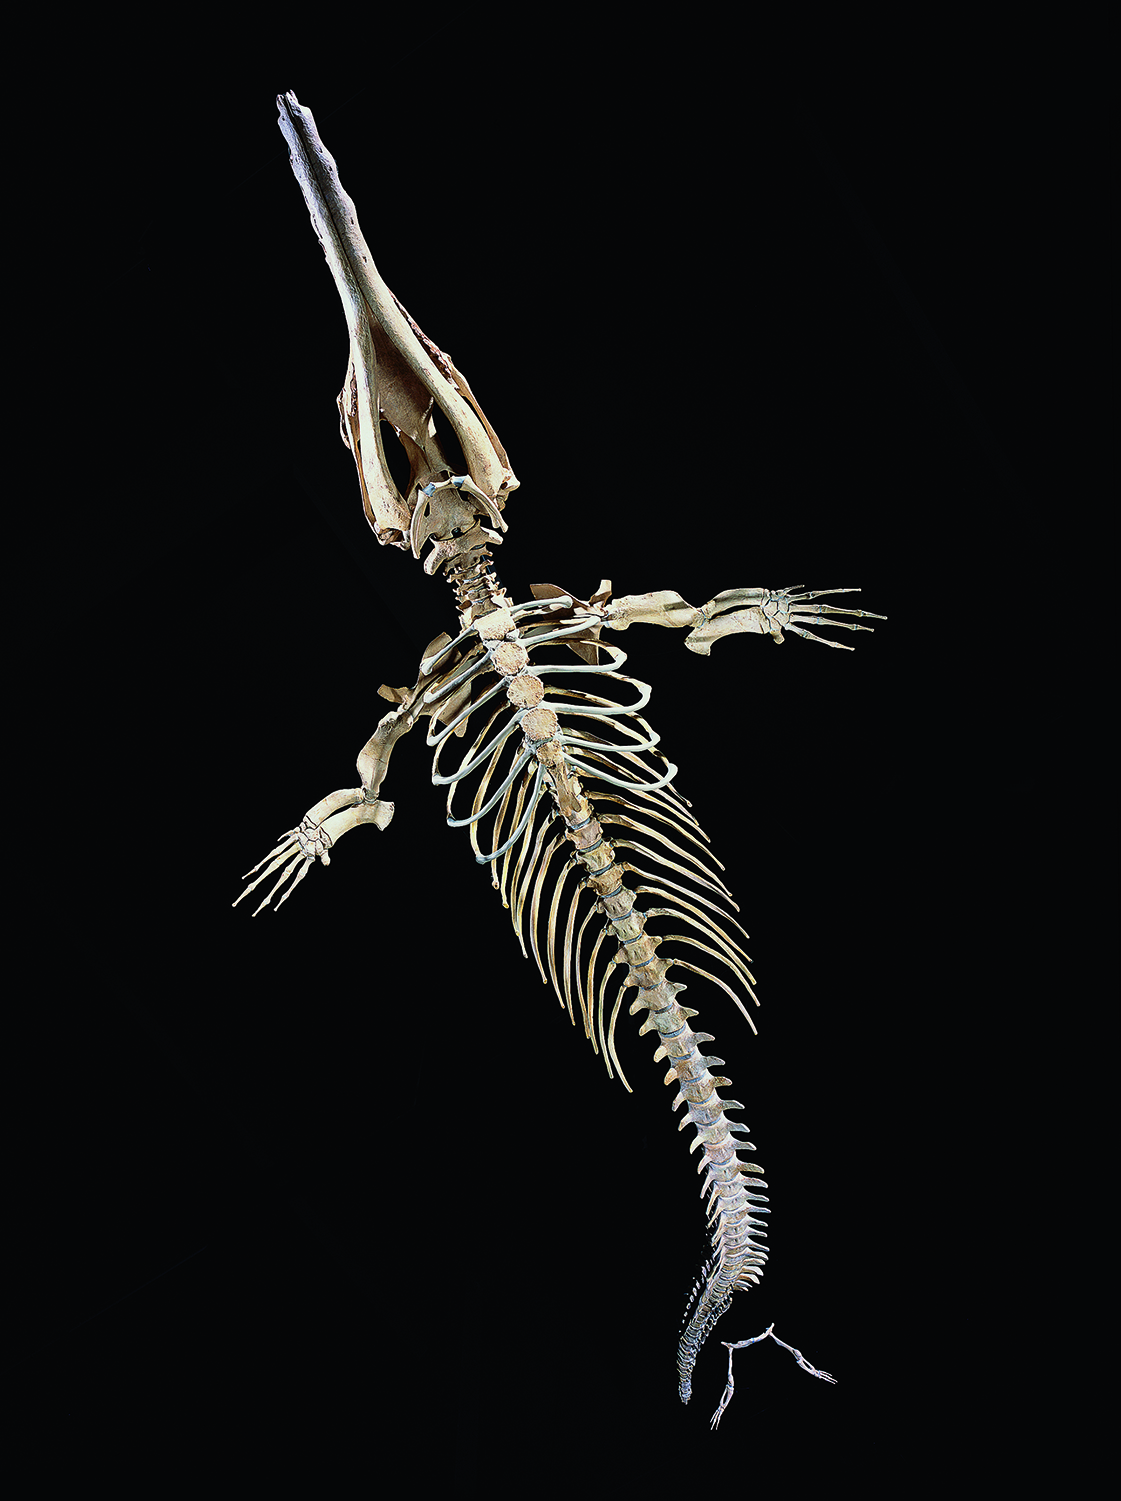 The skeleton of a prehistoric whale (Robert Clark/Published by Phaidon)